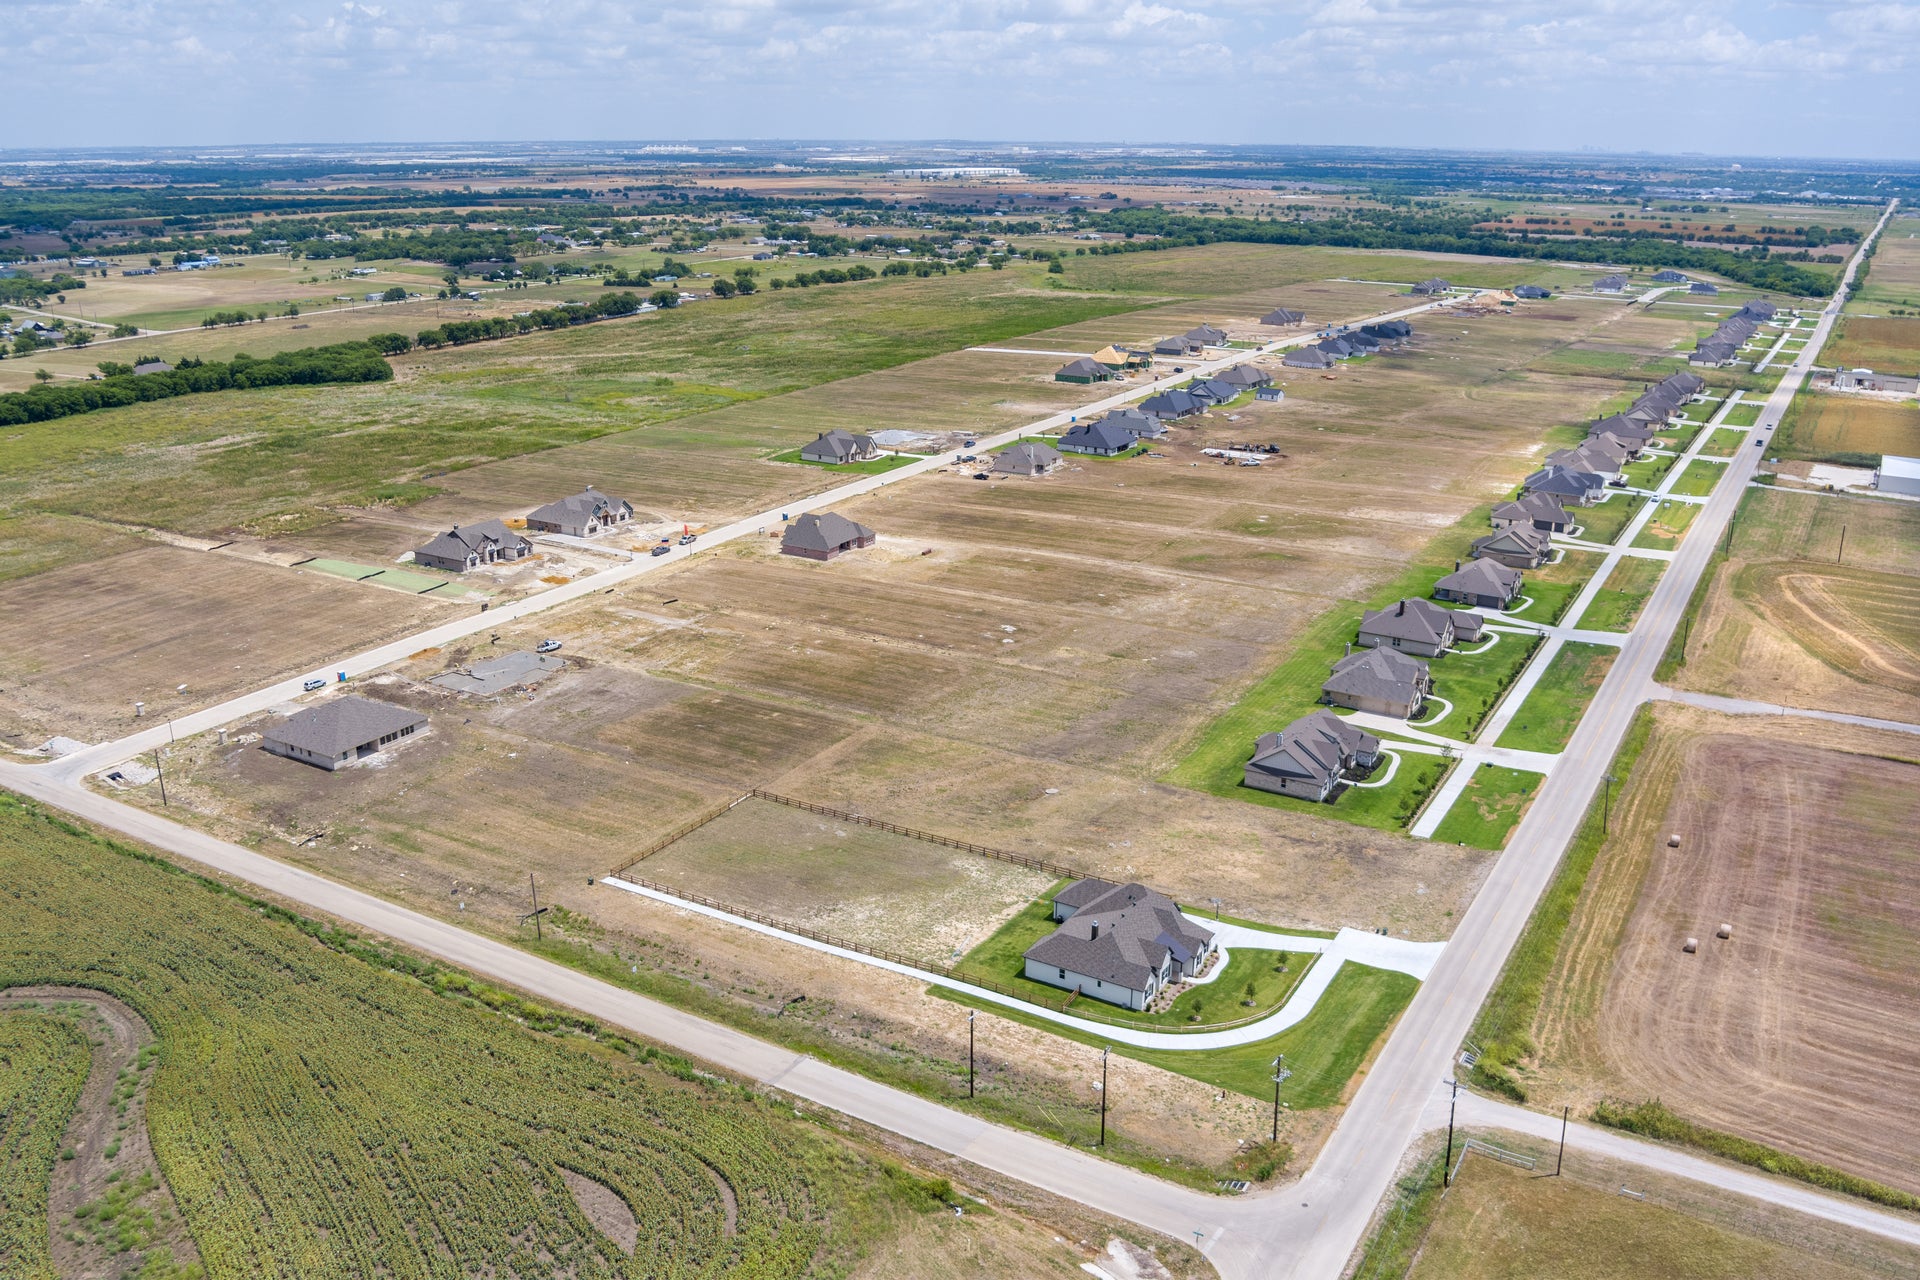 New Homes in New Fairview, TX